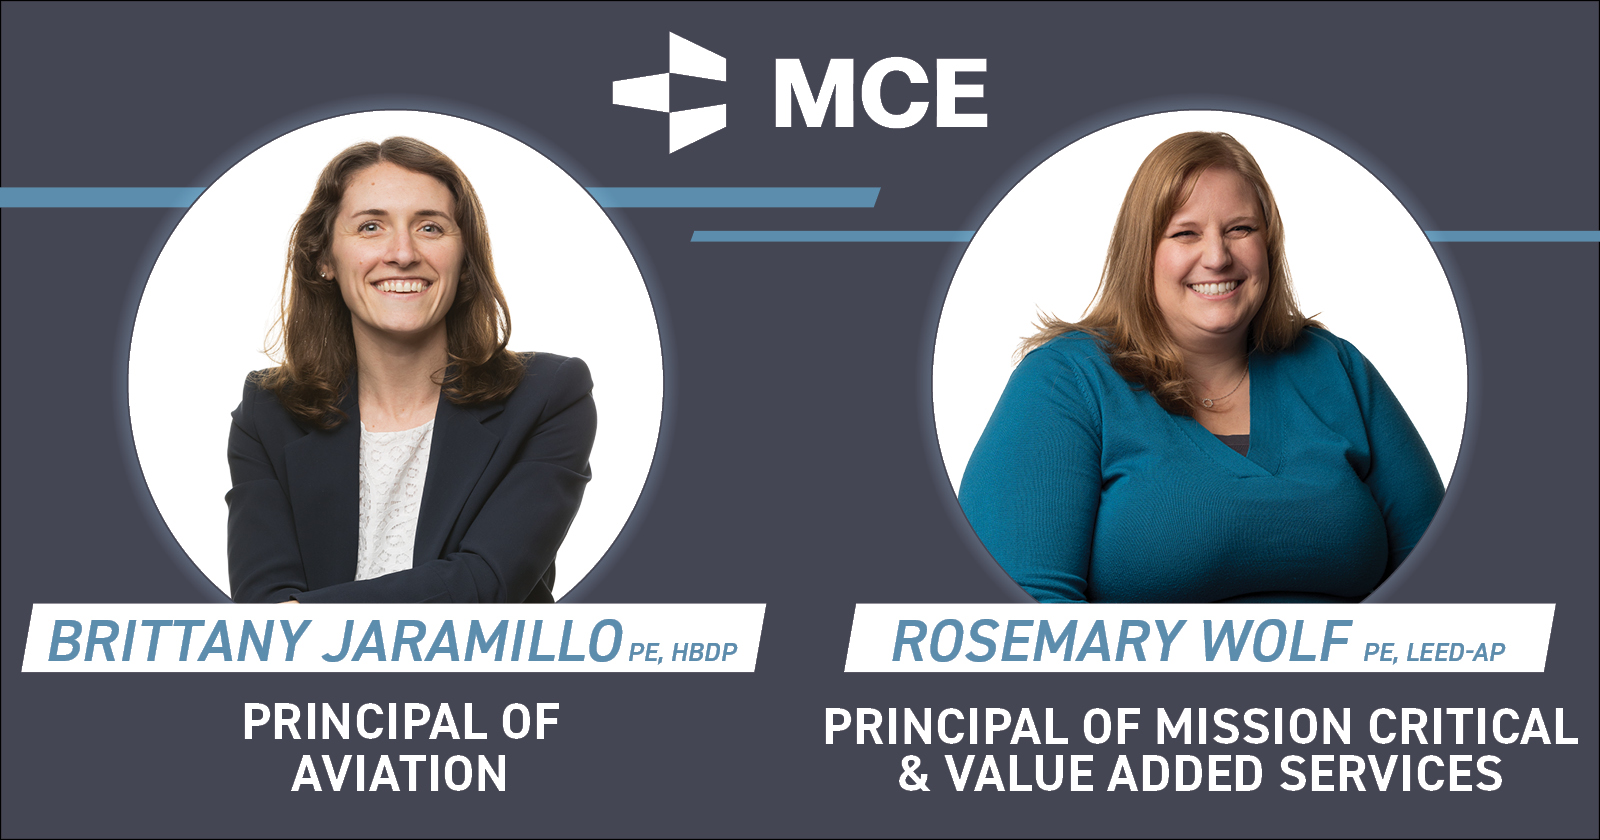 Exciting Announcement: MCE Elevates Brittany Jaramillo and Rosemary Wolf to Leadership Roles!